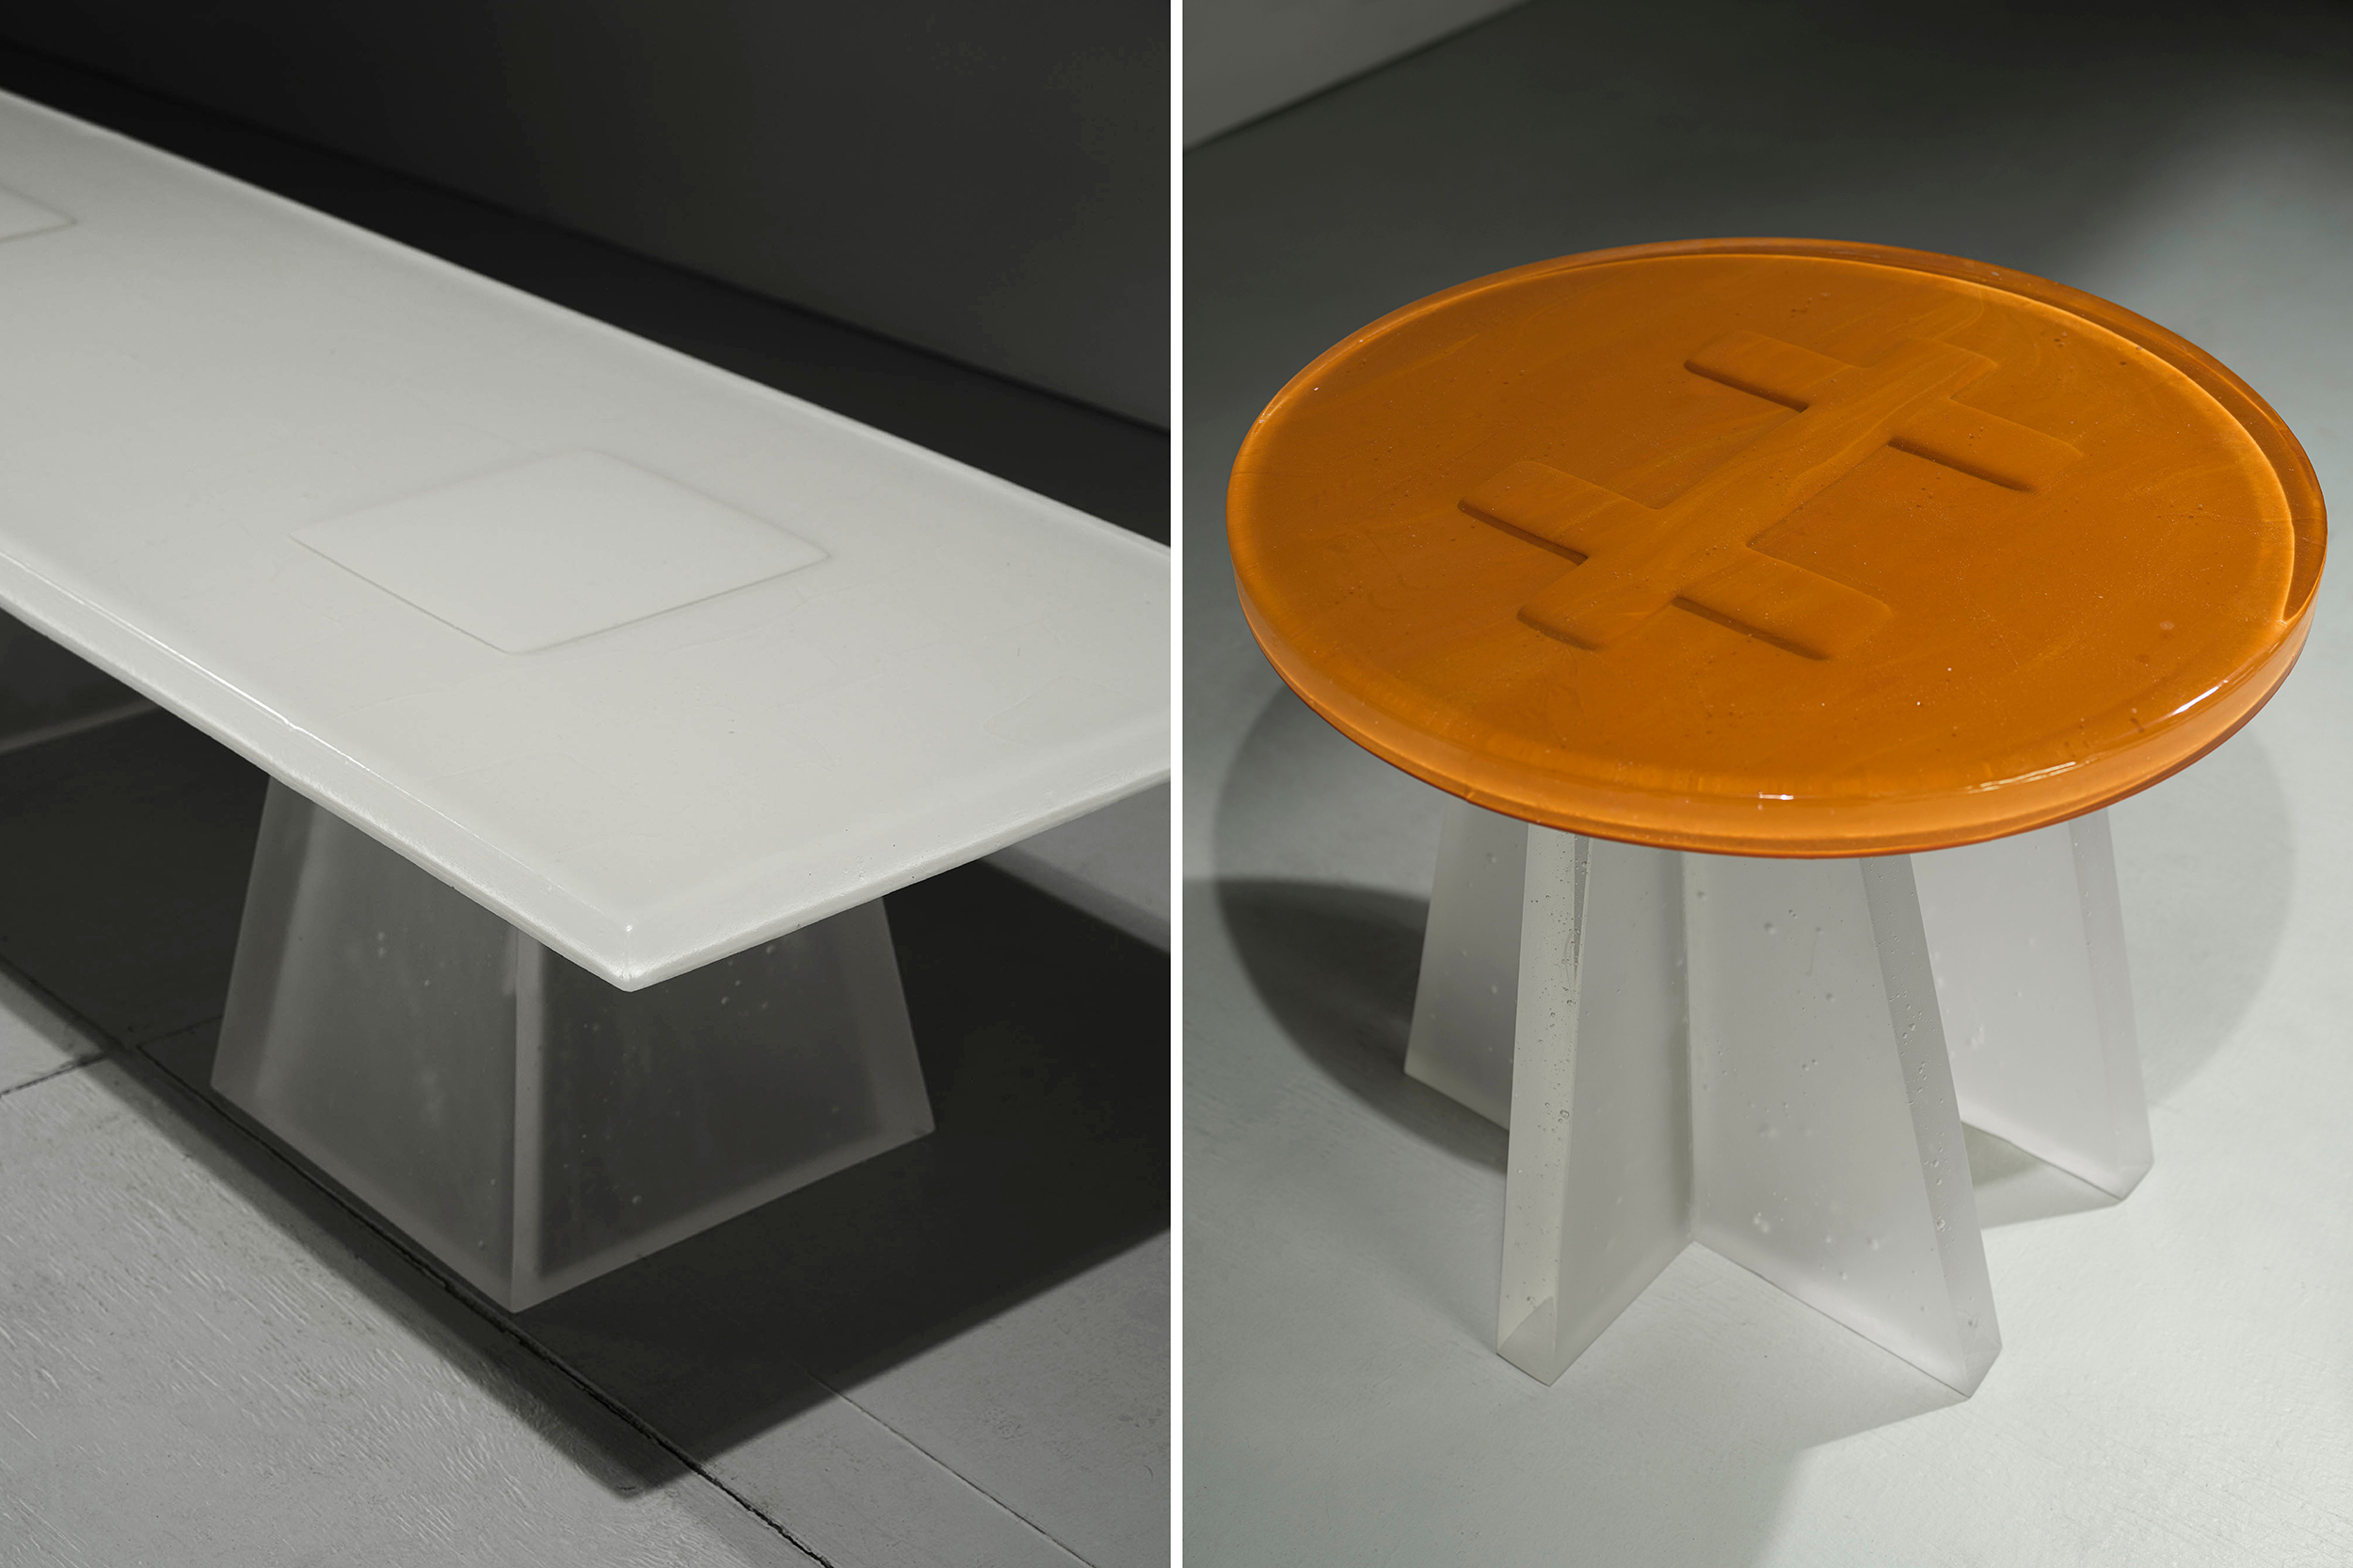 A side-by-side of cast glass tables — one a coffee table, the other a side table.